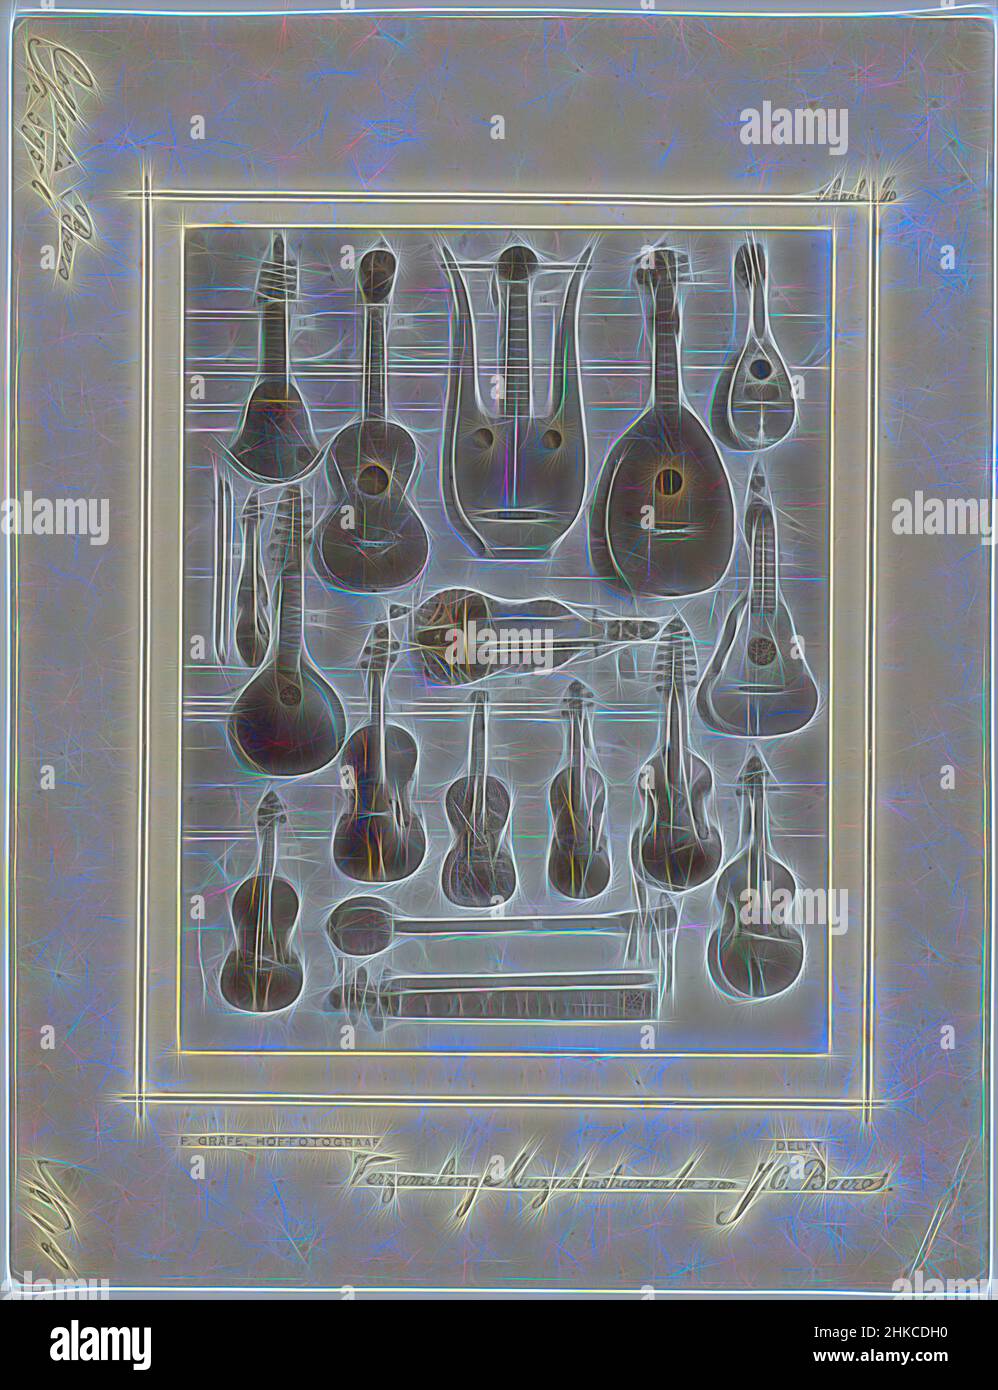 Inspired by Collection of musical instruments from the collection of the composer J.C. Boers: stringed instruments, Collection of Musical Instruments of J.C. Boers, Frederik Christiaan Filip Gräfe, Delft, 1863 - c. 1905, paper, height 208 mm × width 164 mmheight 320 mm × width 248 mm, Reimagined by Artotop. Classic art reinvented with a modern twist. Design of warm cheerful glowing of brightness and light ray radiance. Photography inspired by surrealism and futurism, embracing dynamic energy of modern technology, movement, speed and revolutionize culture Stock Photo